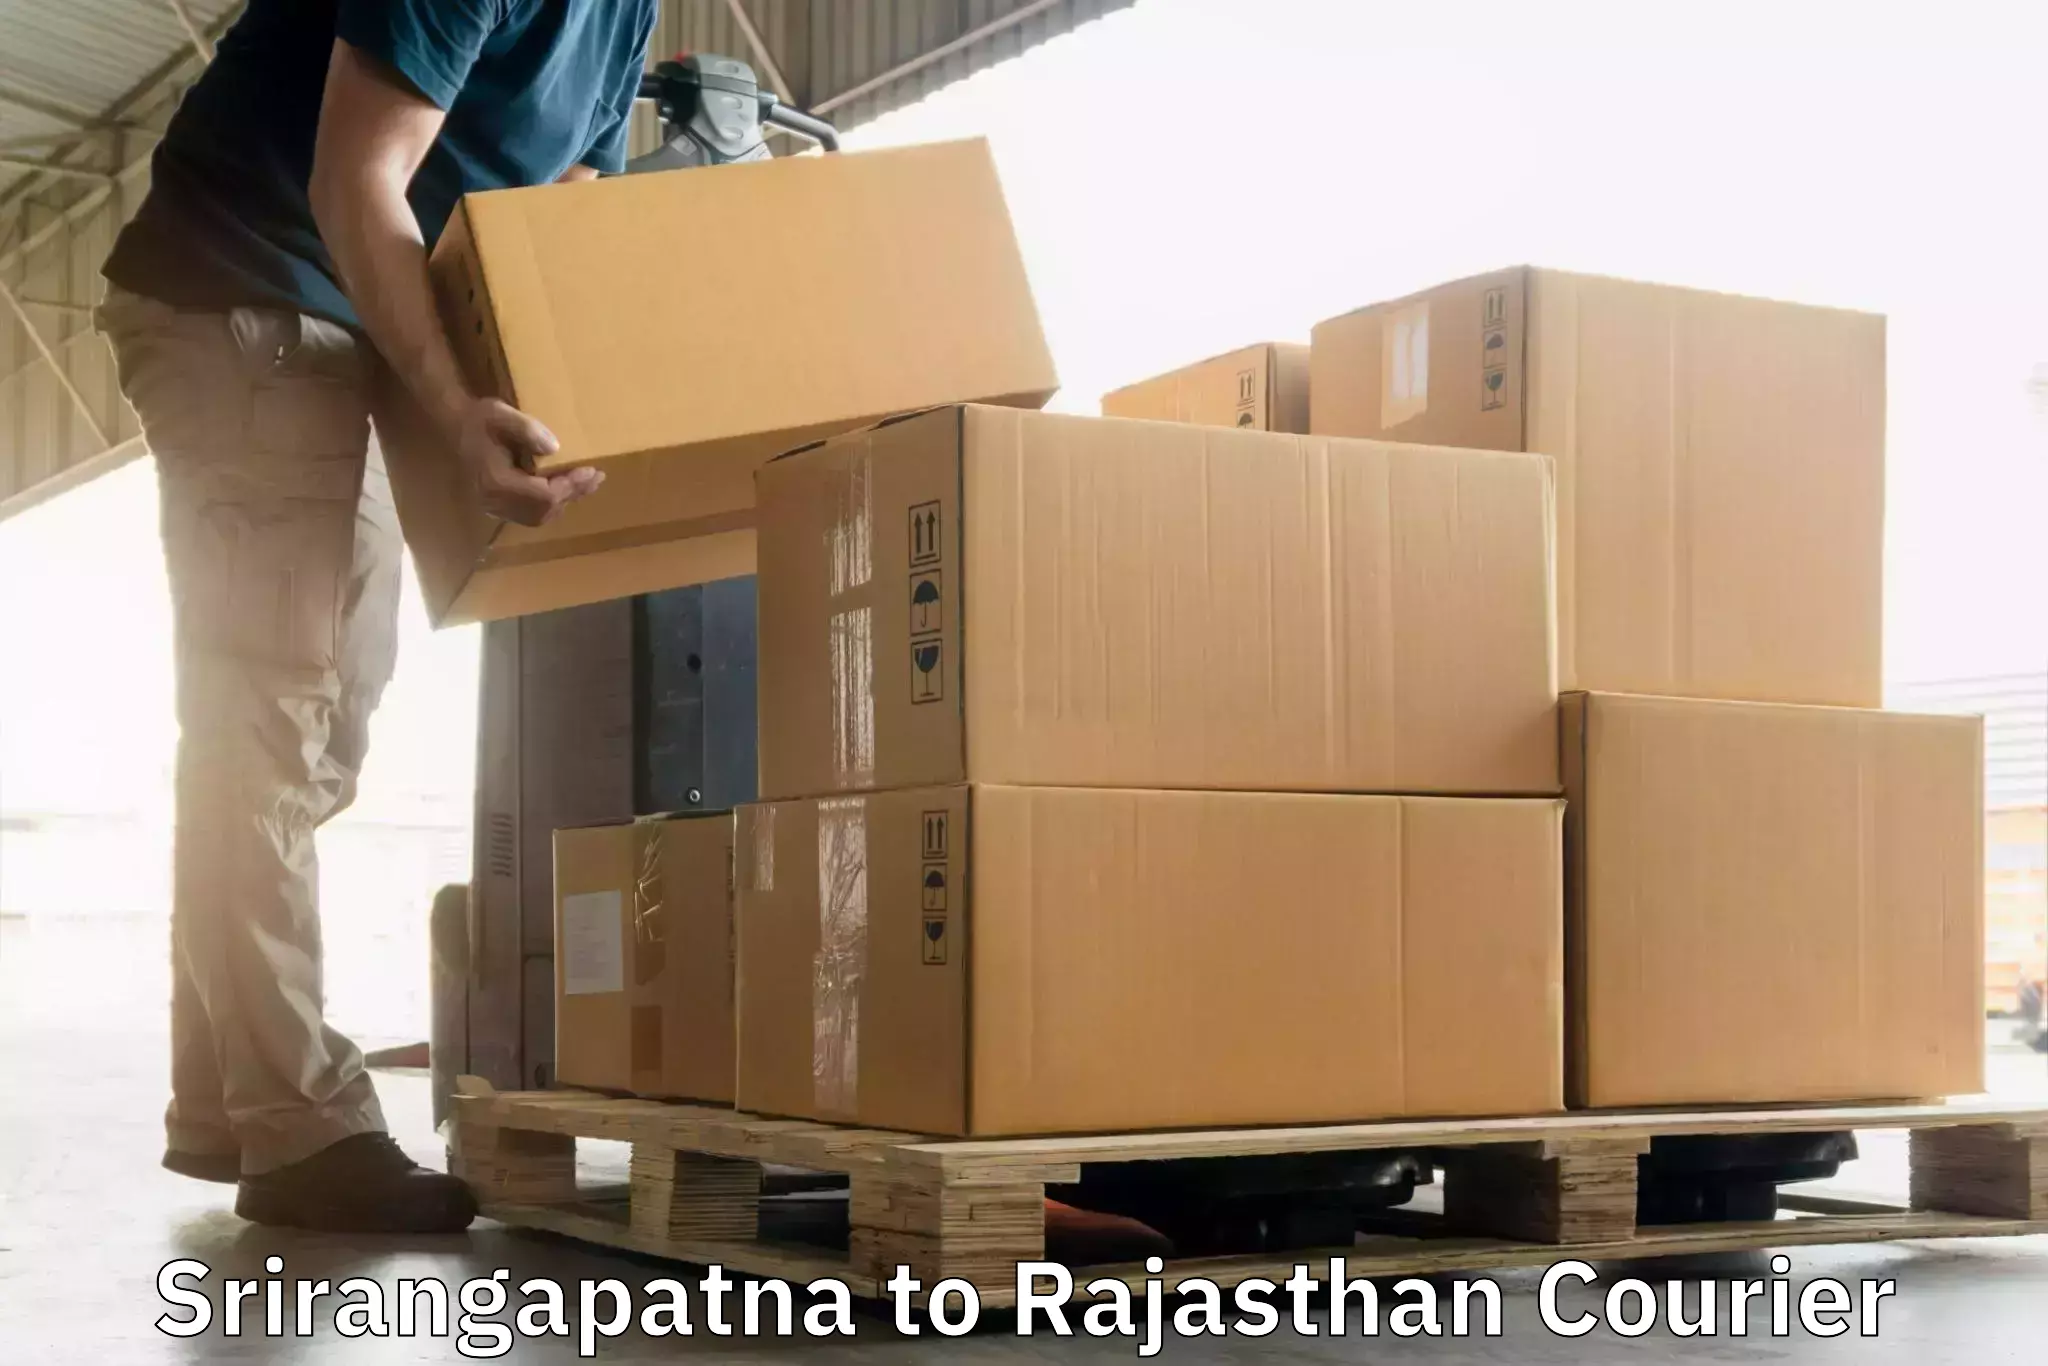 Multi-national courier services Srirangapatna to Rajasthan